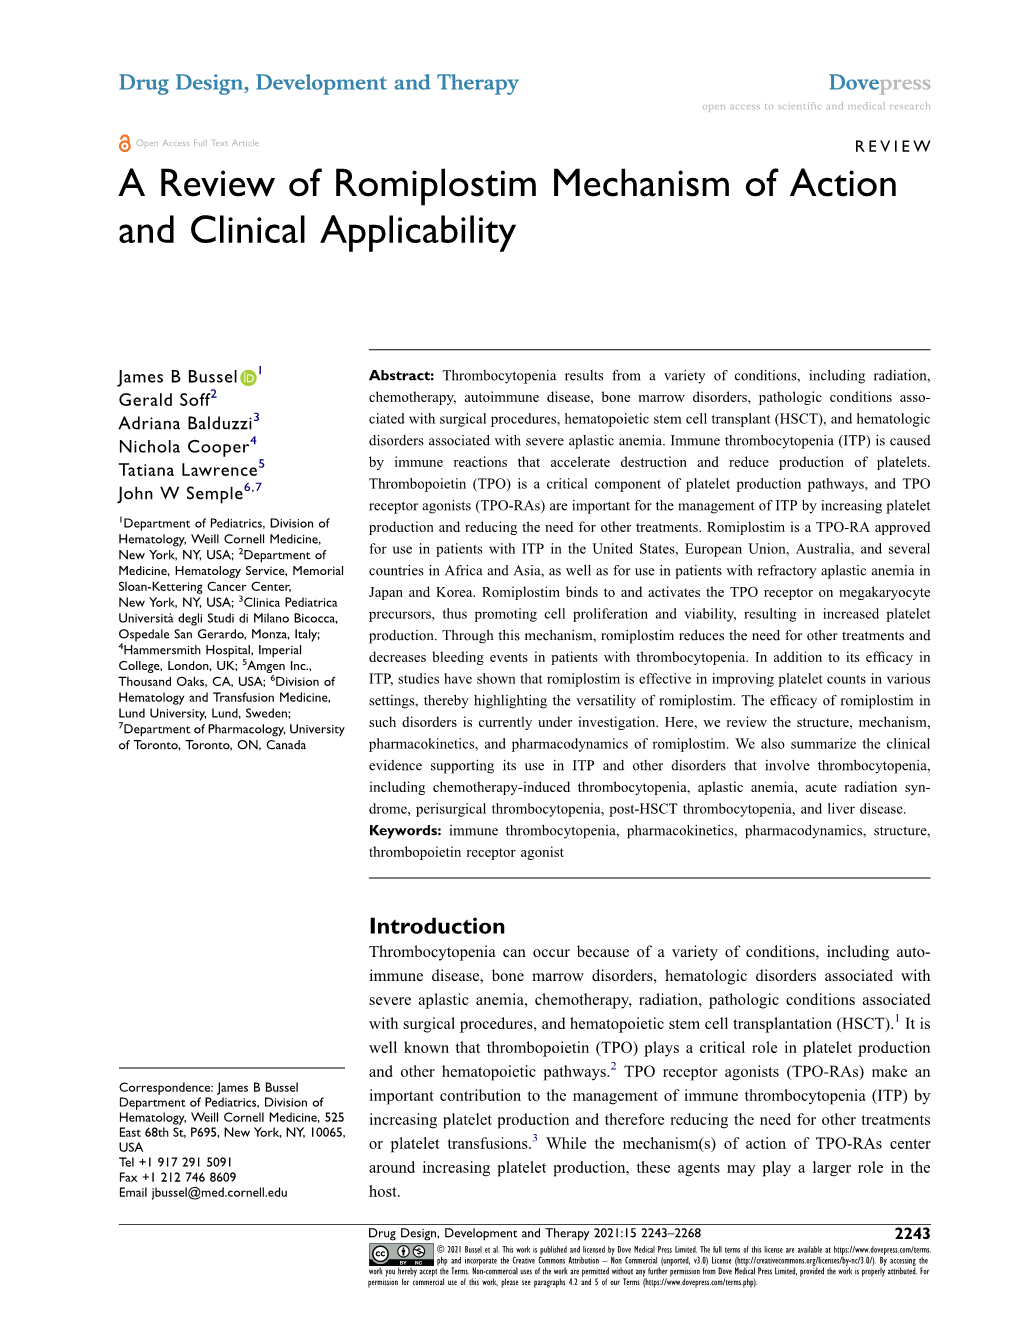 A Review of Romiplostim Mechanism of Action and Clinical Applicability